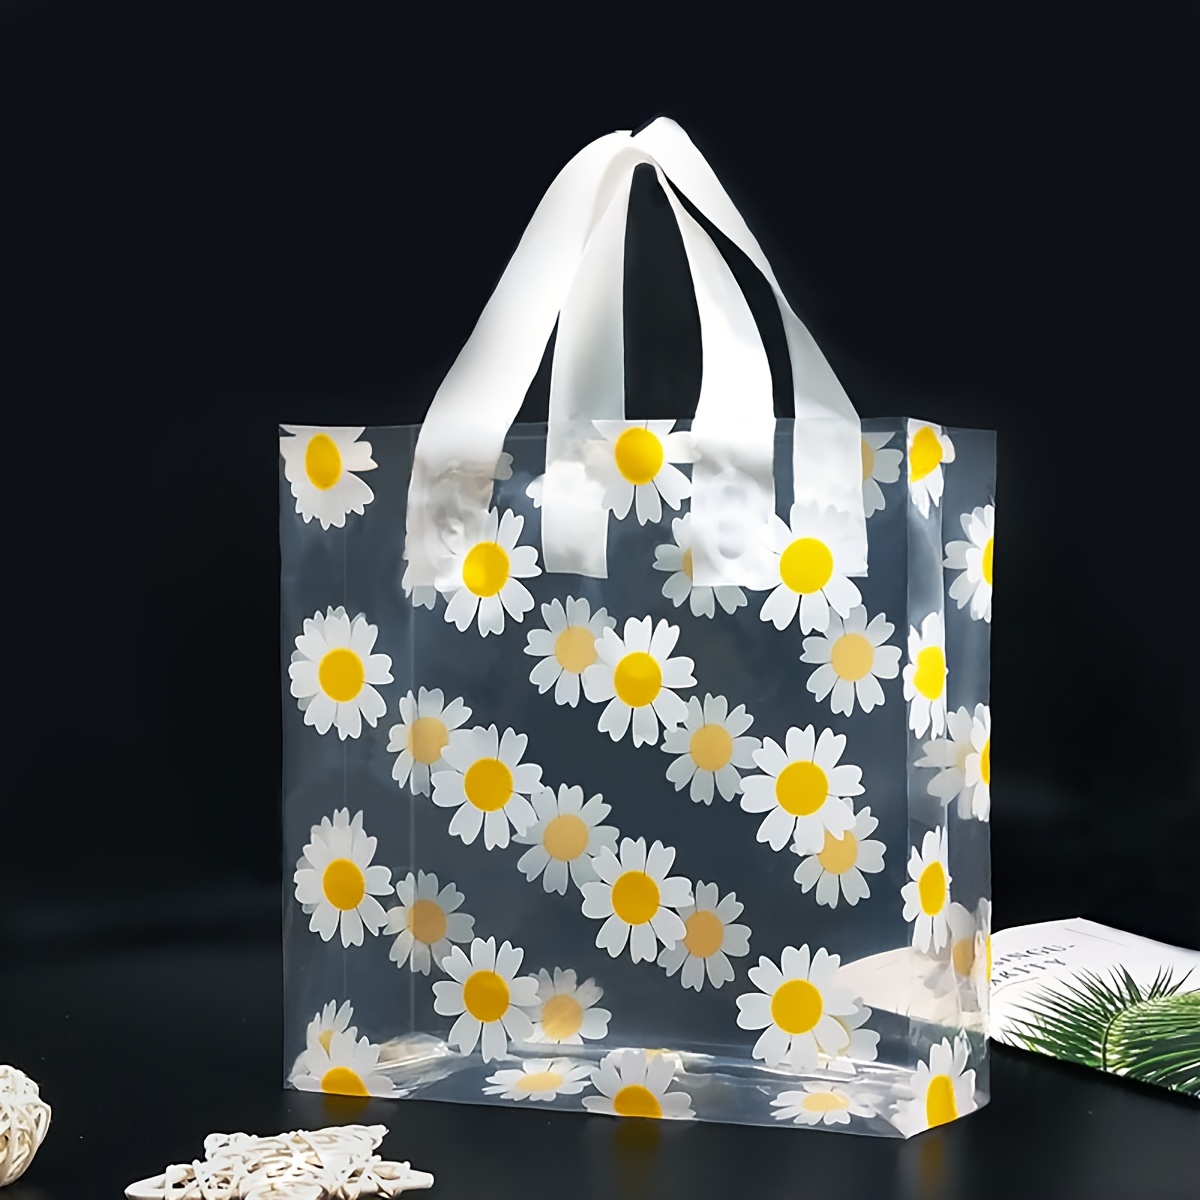 5pcs Sunflower Print Tote Bags 11 8 x9 8 x3 1 Gift Satchel Bag Daily Bag Holiday Gift Supplies Party Decoration